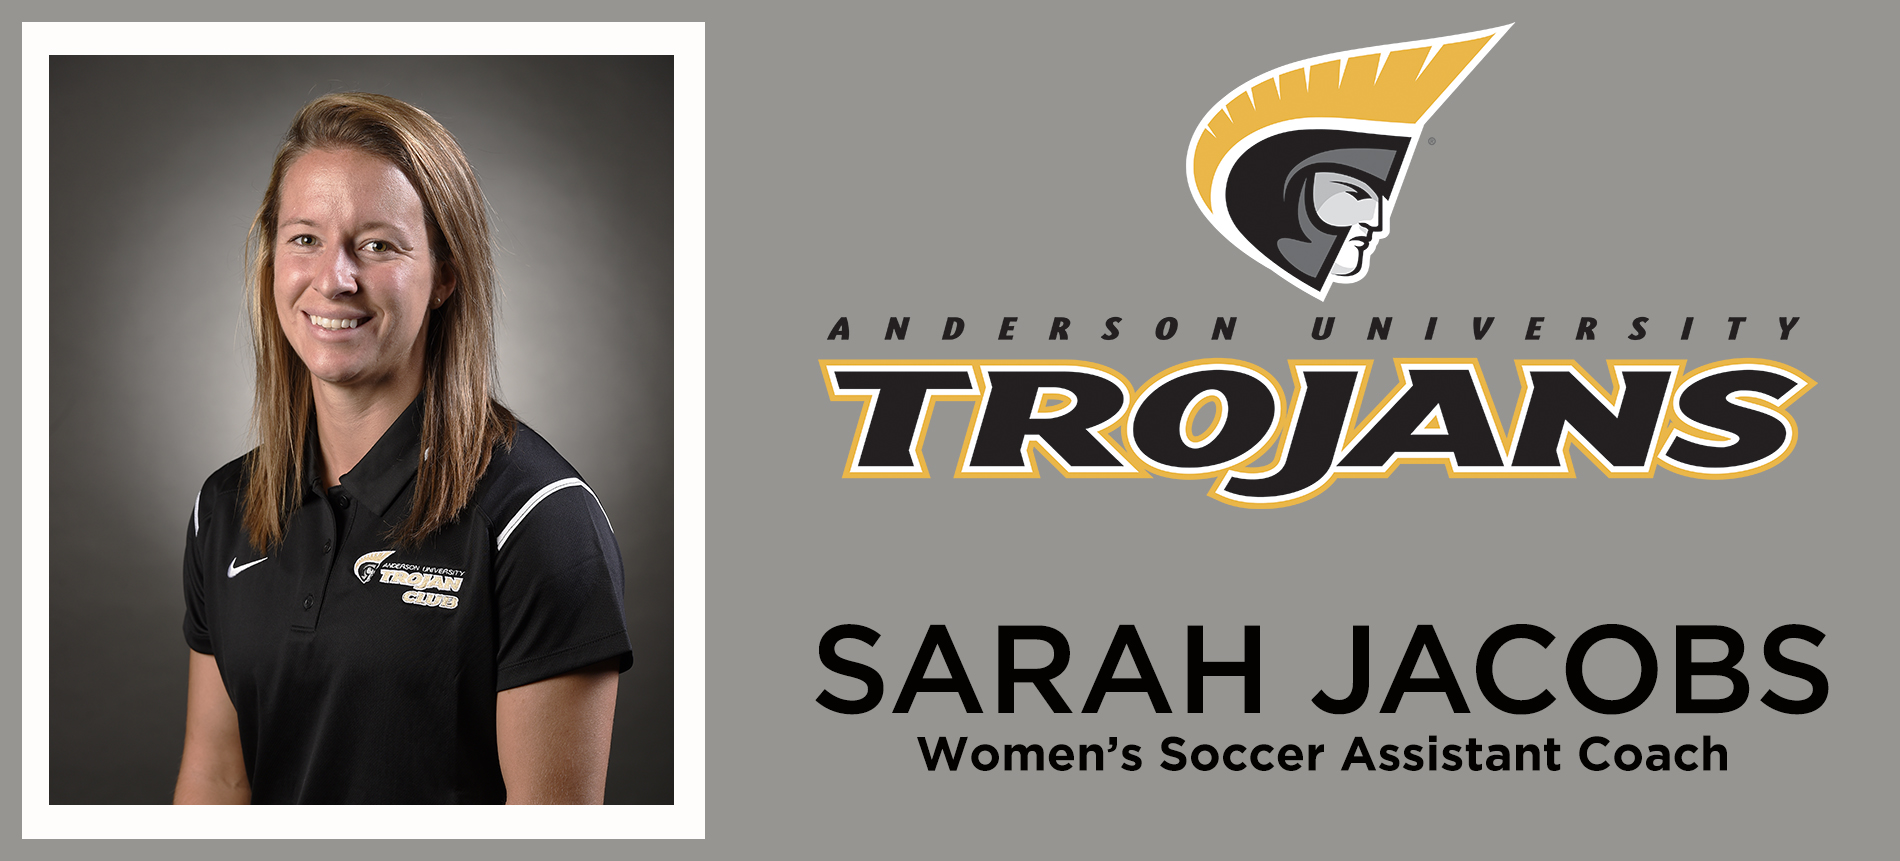 Jacobs Named Women’s Soccer Assistant Coach